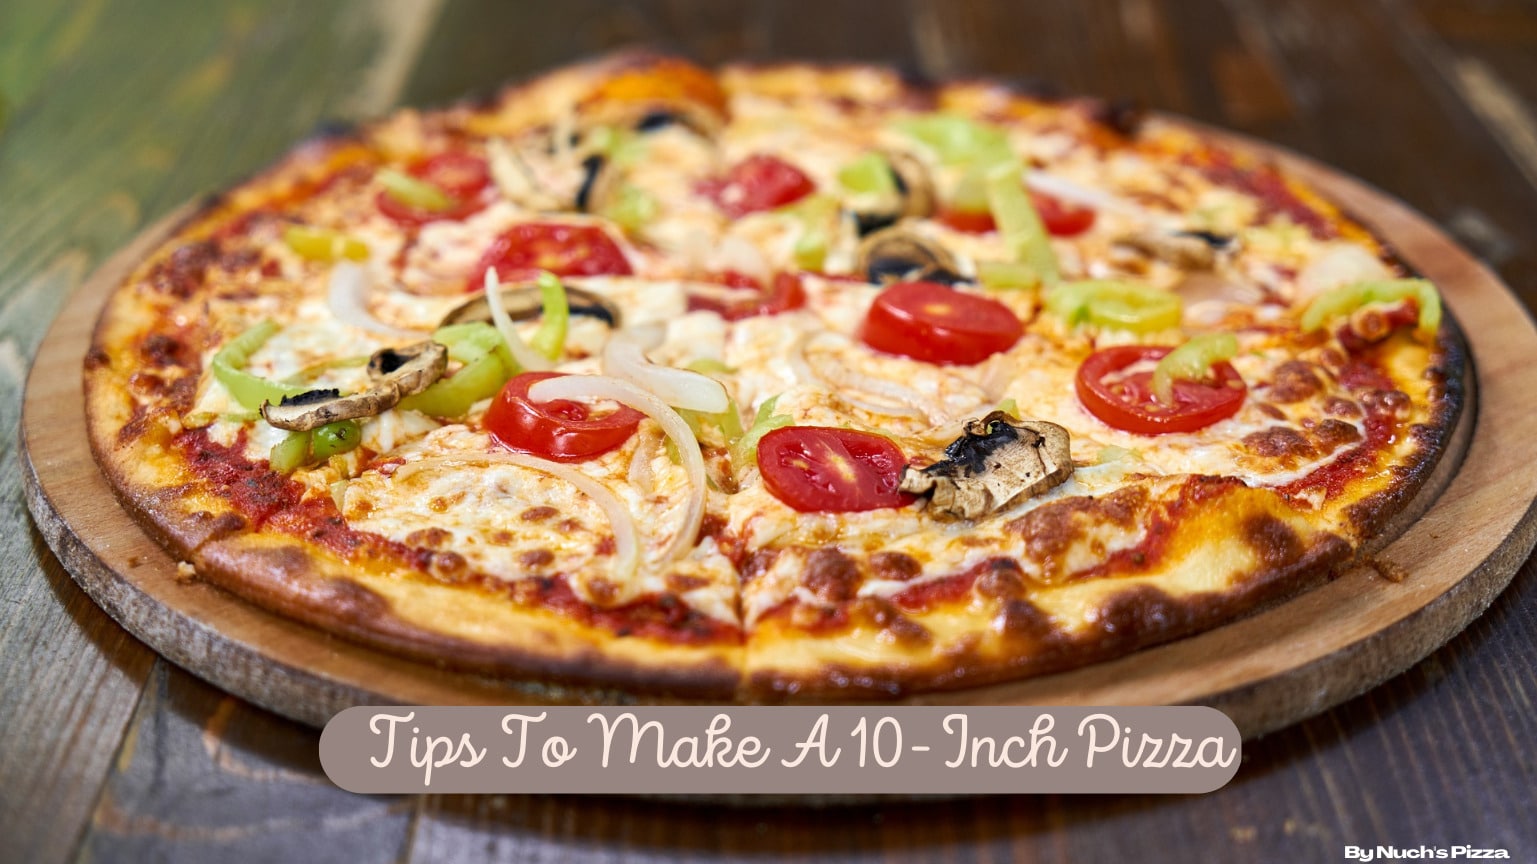 Tips to make a tasty 10-inch pizza